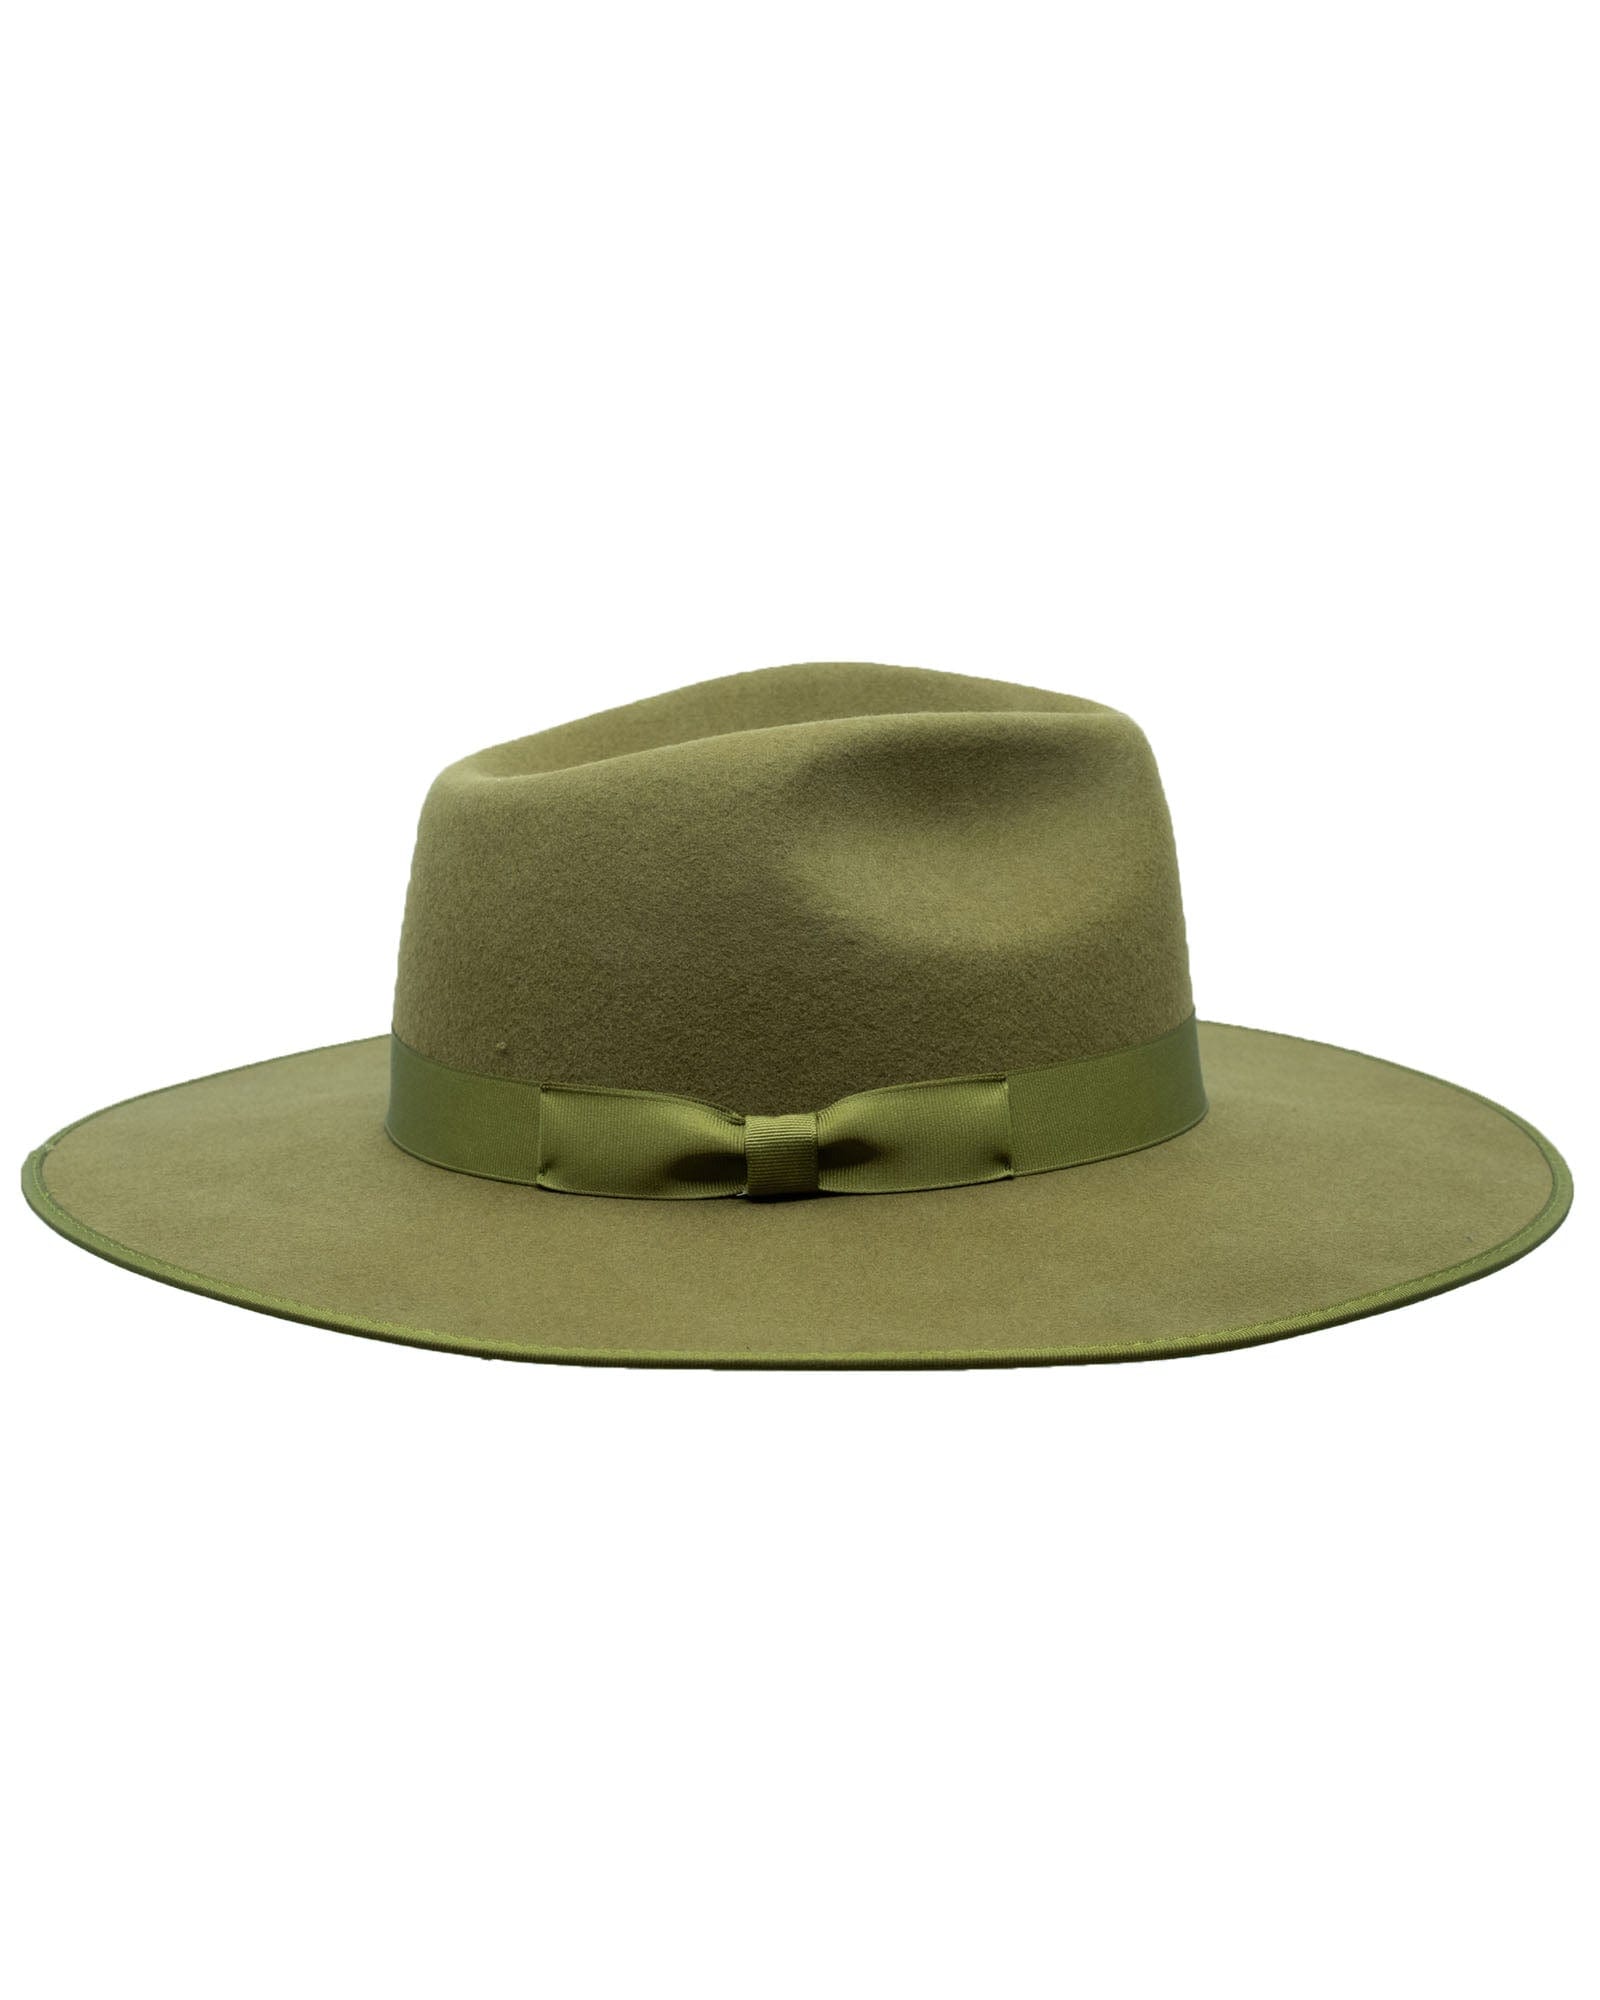 La Pine Wool Hat | Wool Hats by Outback Trading Company ...